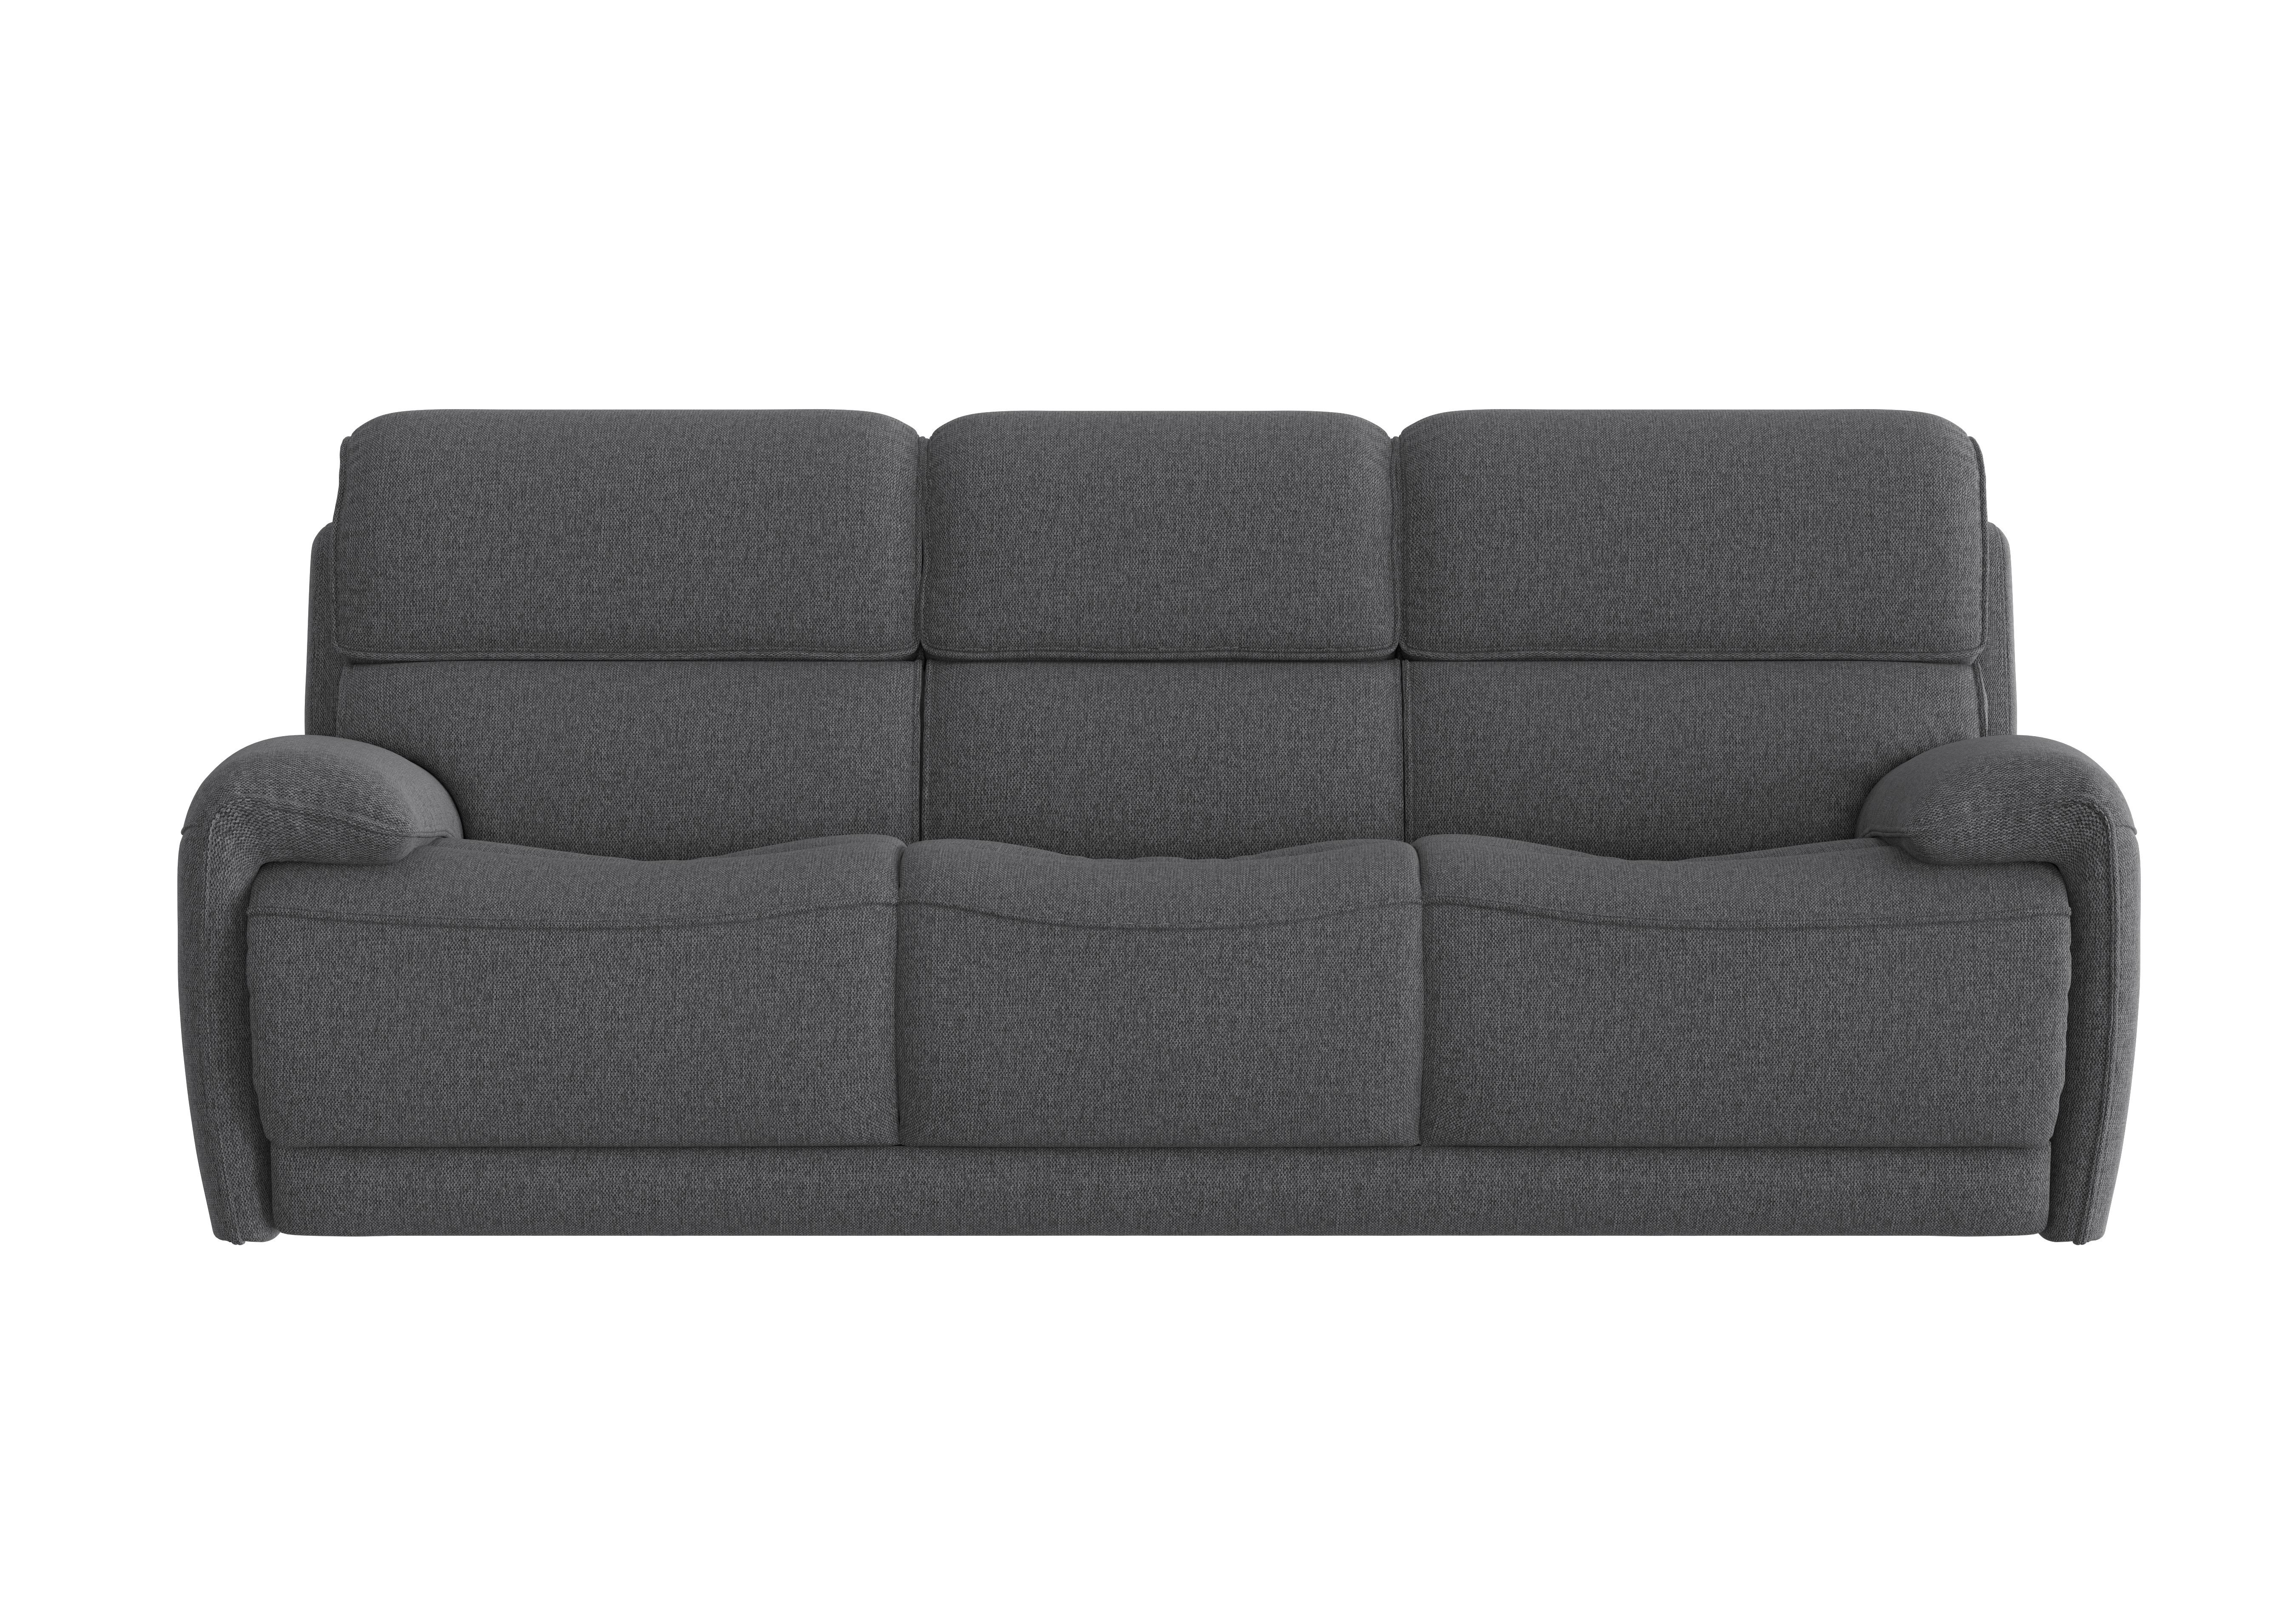 Link 3 Seater Fabric Sofa in Fab-Blt-R39 Charcoal on Furniture Village